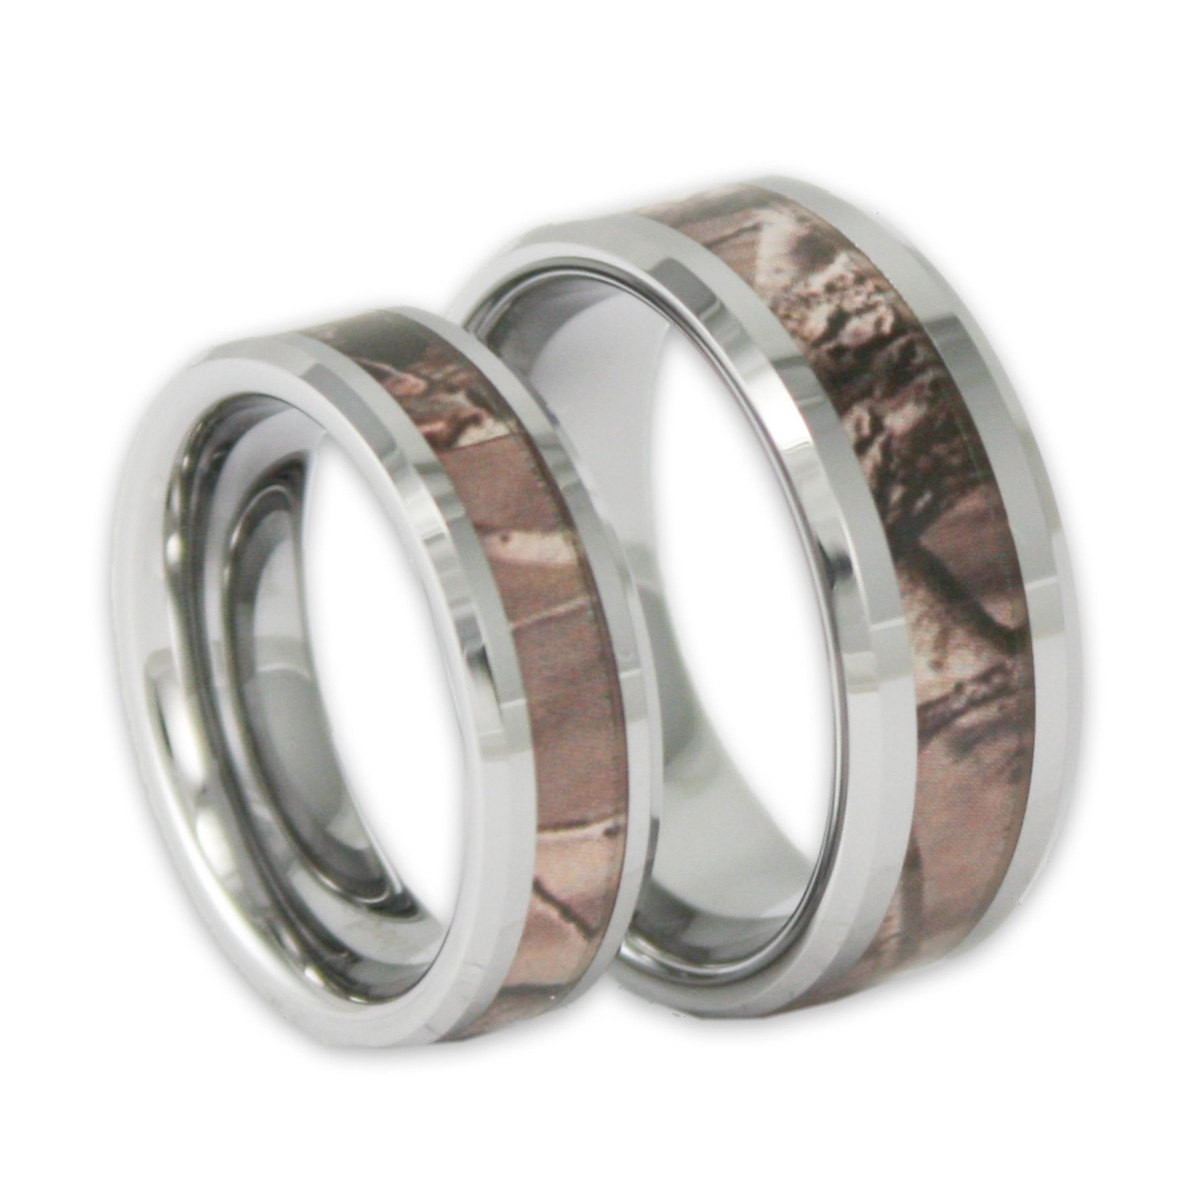 Camouflage Wedding Ring Sets
 Couples Tree Camo Wedding Ring Set His and Hers Matching